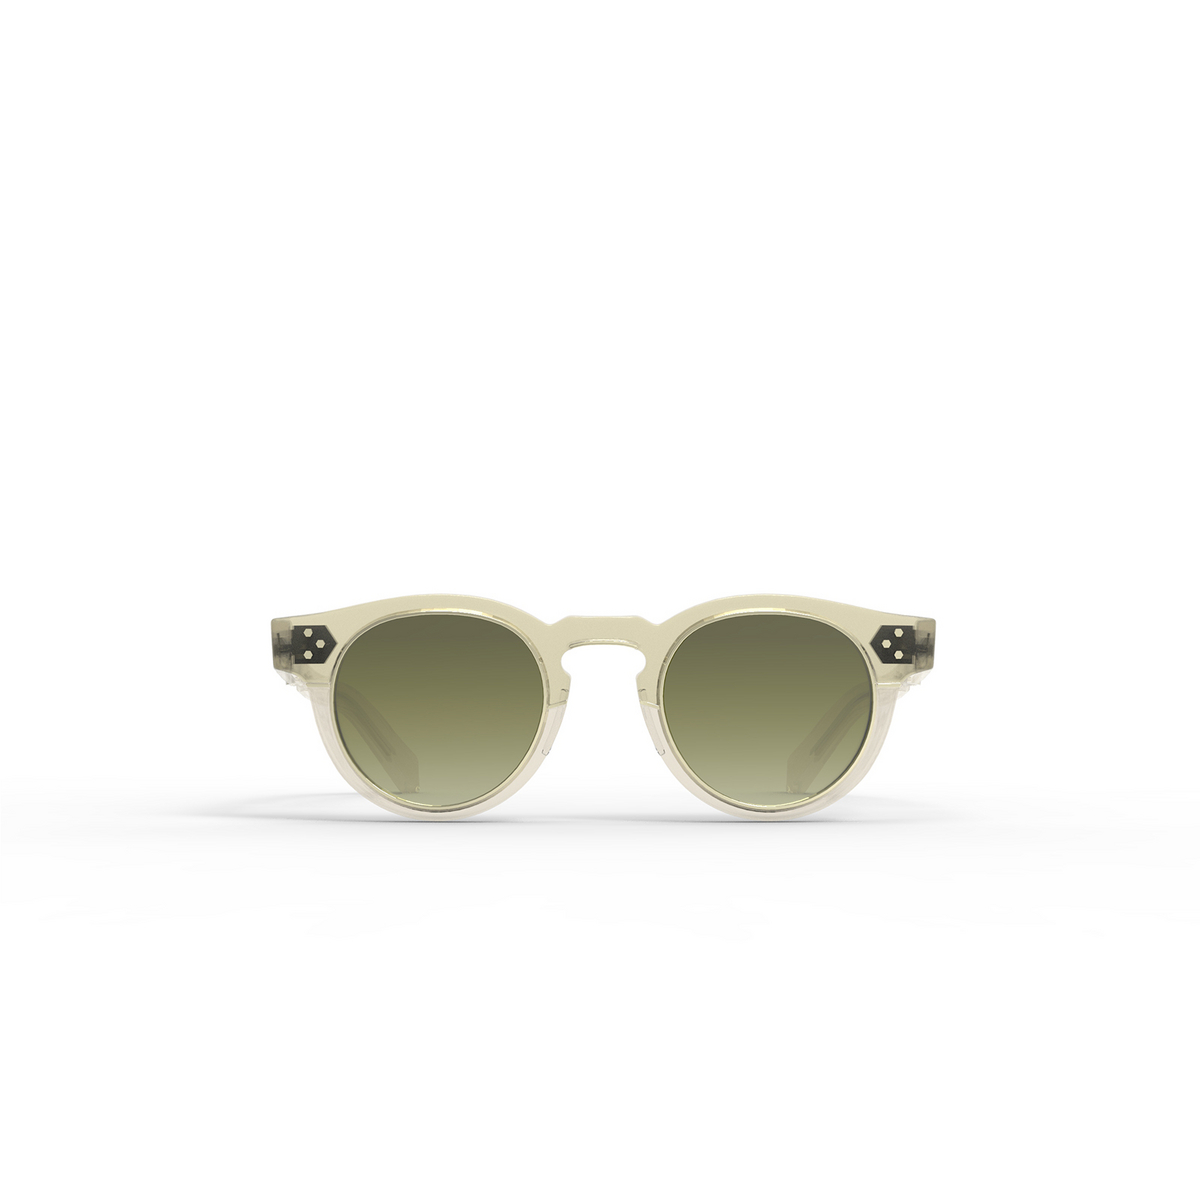 Mr. Leight® Round Sunglasses: Kennedy S color Artist Crystal-12k White Gold/elm Mirror ARTCRY-12KG/ELMM - front view.